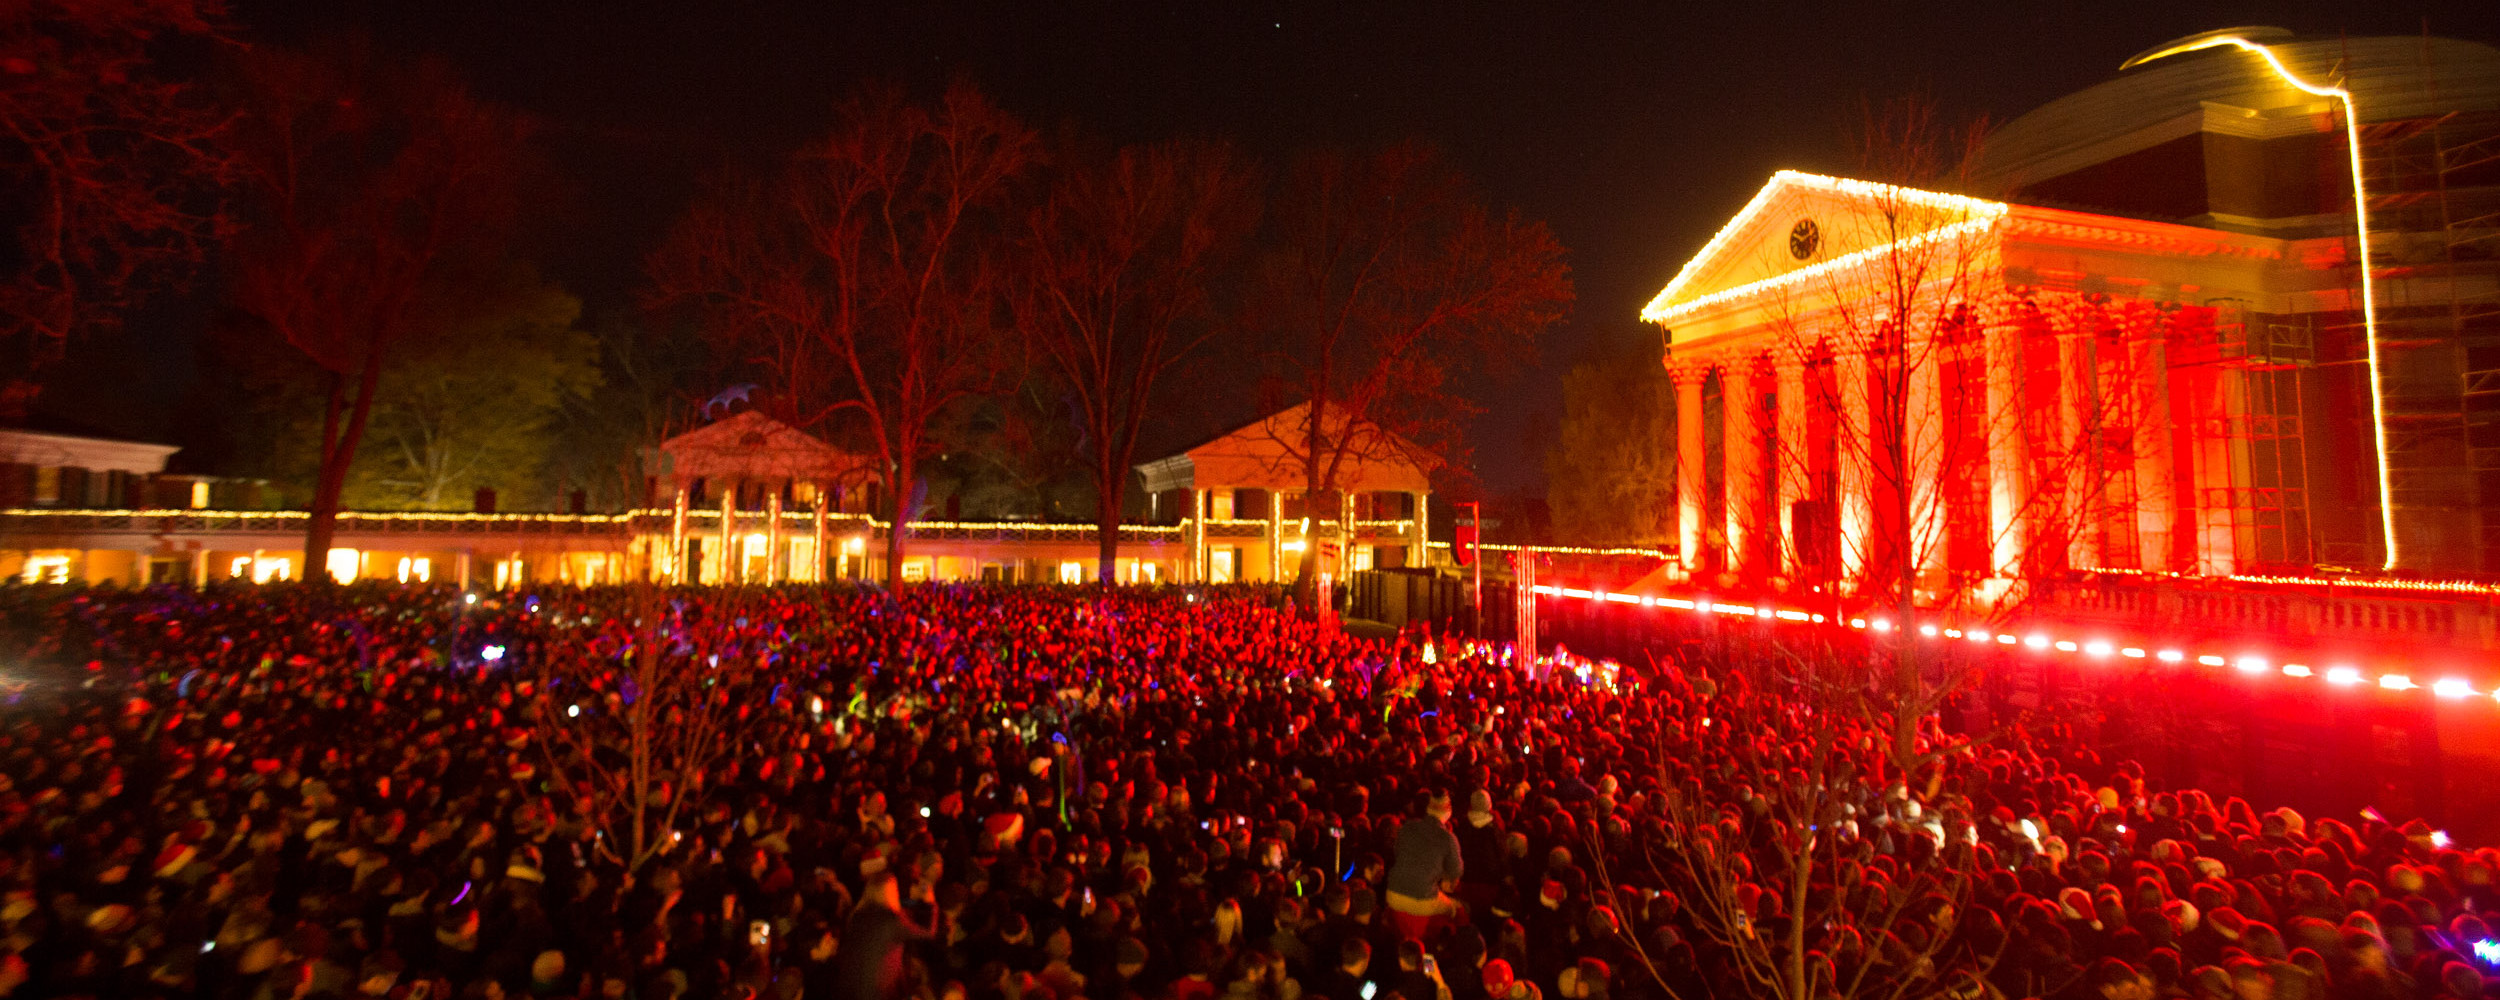 Thousands of students on the Lawn with colorful lights as the Rotunda is lit up